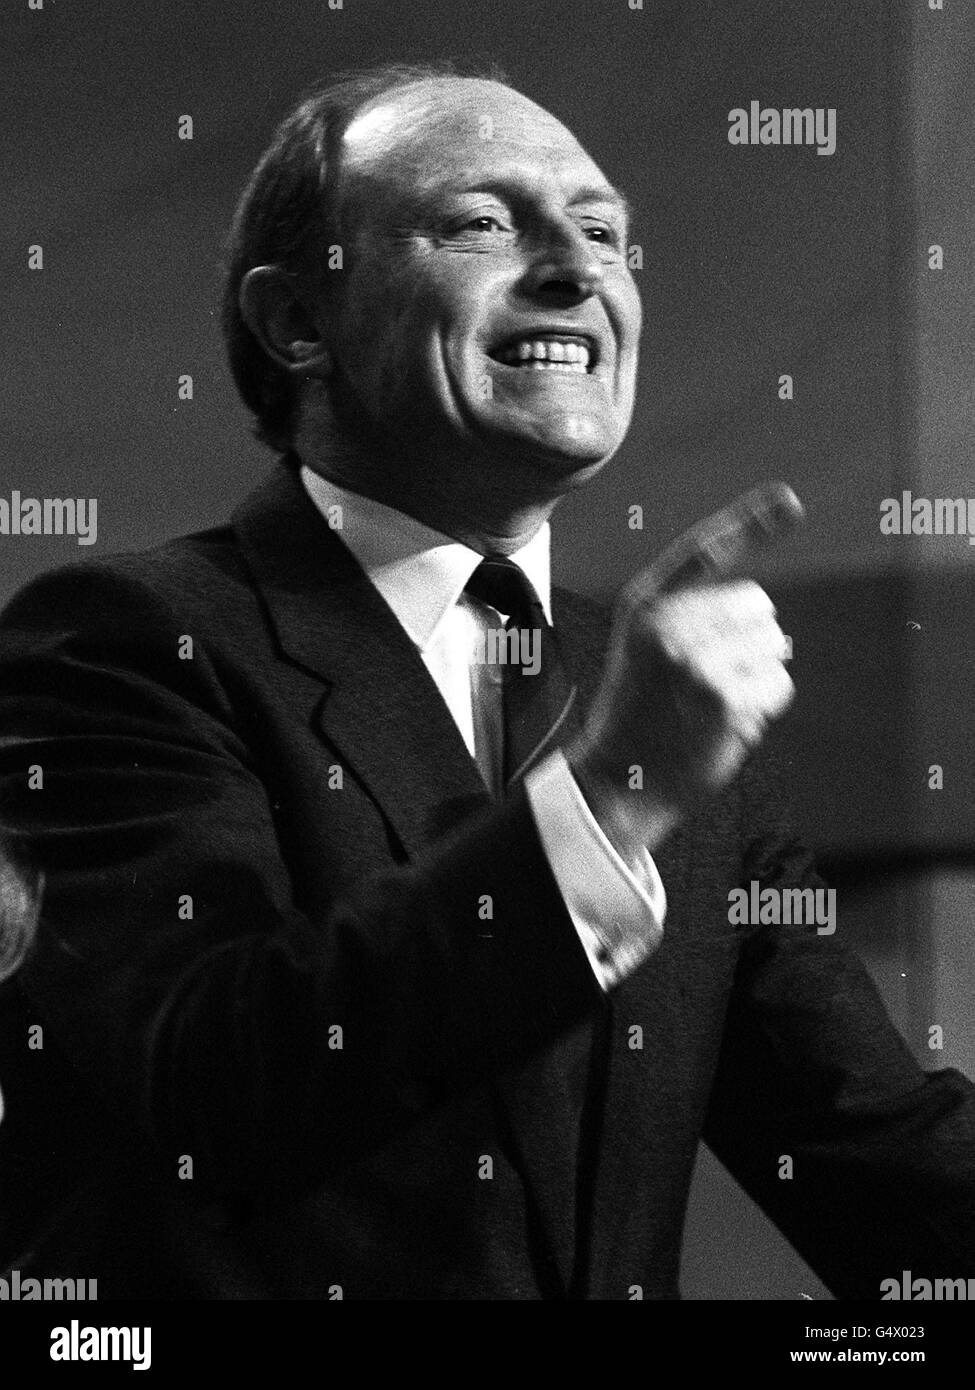 Labour leader Neil Kinnock in a second passsionate speech to conference. Mr Kinnock declared that it would be "utterly dishonest" to pledge that a future Labour government would repay all the court fines incurred by the Miners Union in its year-long strike. PA NEWS PHOTO 2/10/85 LABOUR PARTY LEADER NEIL KINNOCK IN HIS SECOND PASSIONATE SPEECH OF THE LABOUR PARTY CONFERENCE. Stock Photo